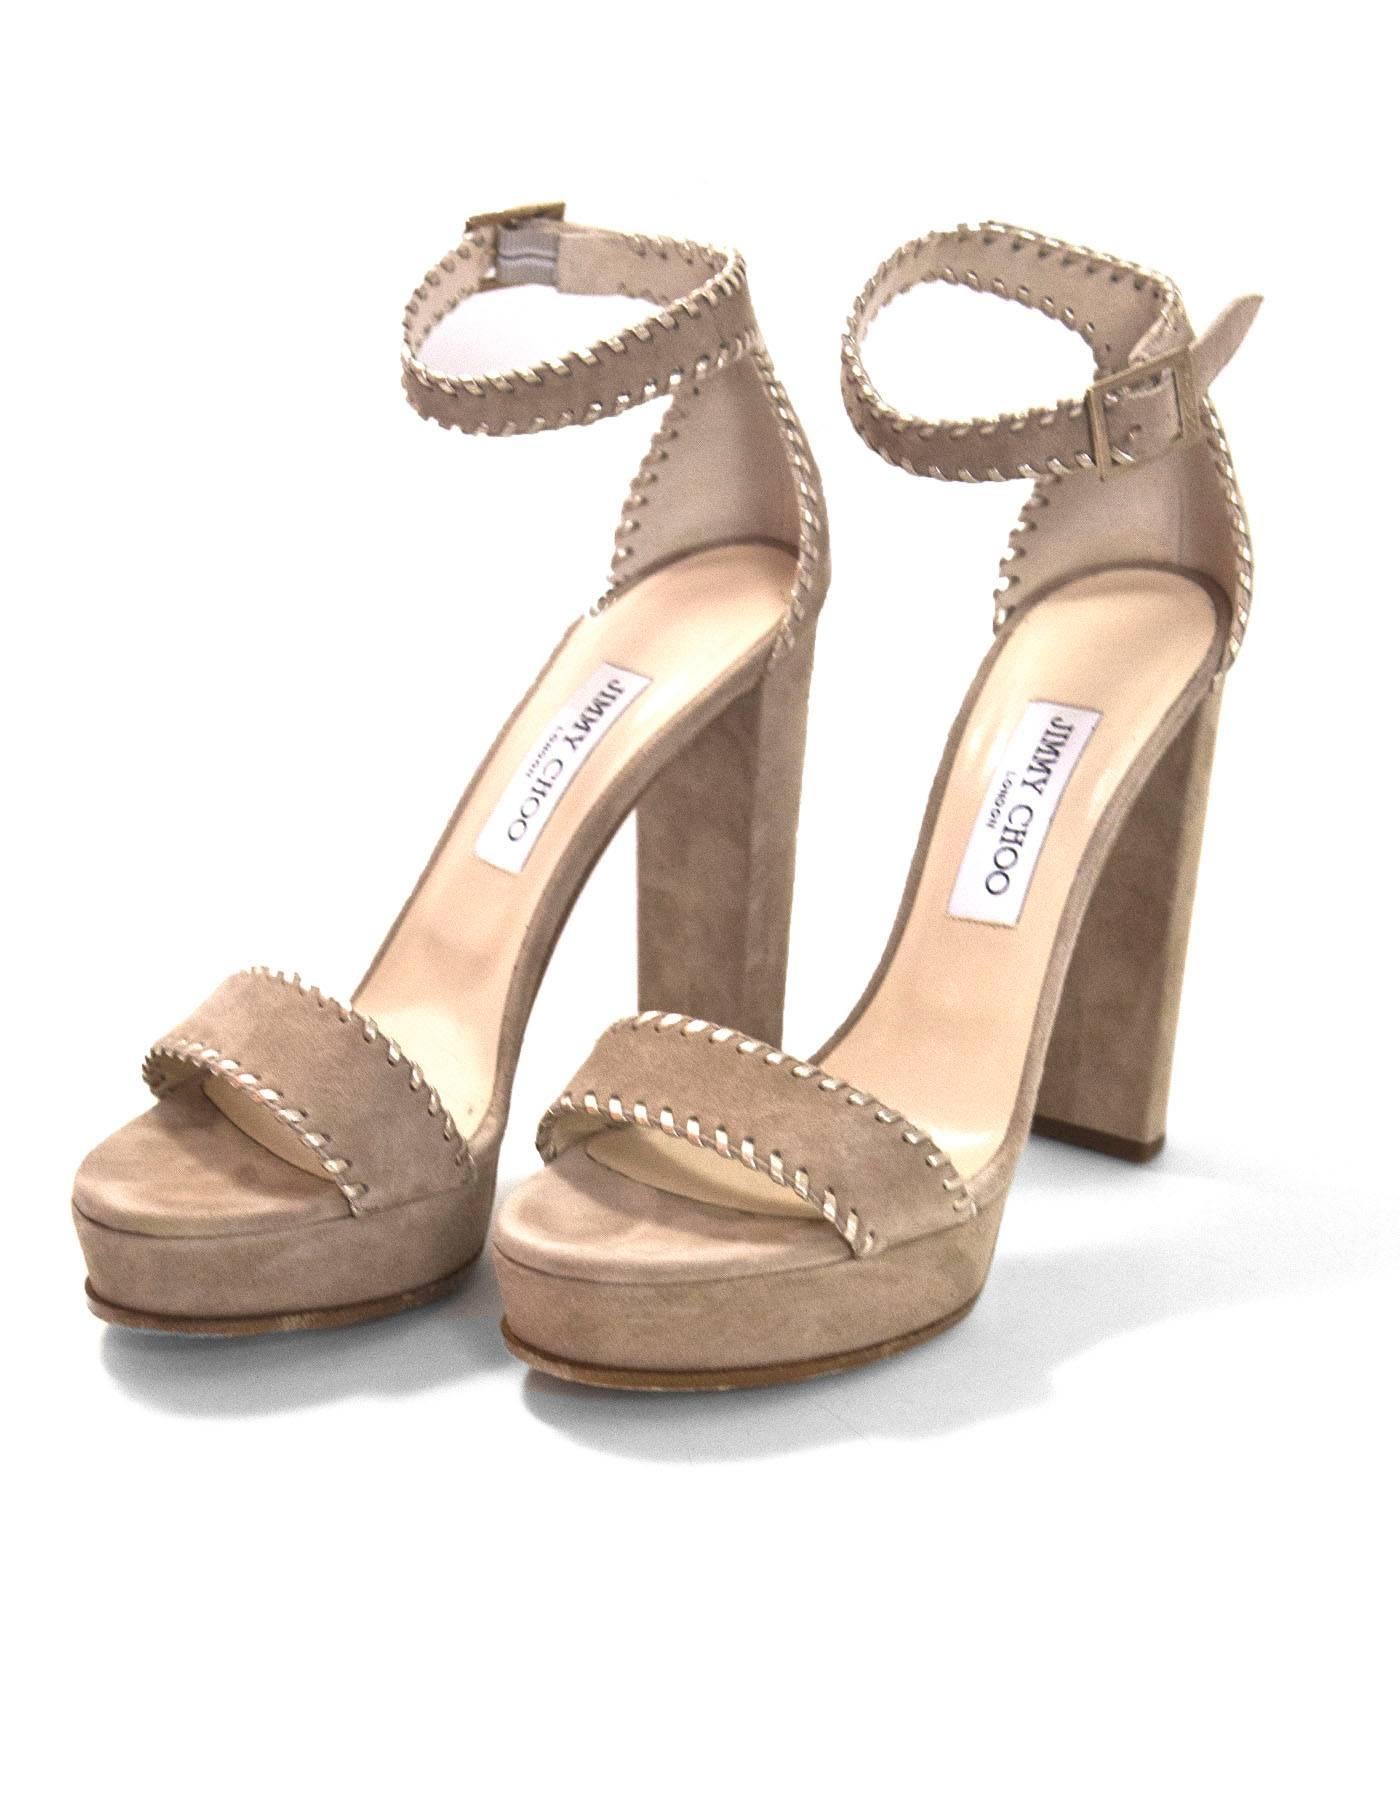 Jimmy Choo Nude Suede Holly Sandals Sz 40

Features gold whipstitch trim

Made In: Italy
Color: Nude
Materials: Suede, leather
Closure/Opening: Buckle closure at ankle
Sole Stamp: Jimmy Choo London Made in Italy 40
Retail Price: $925 + tax
Overall